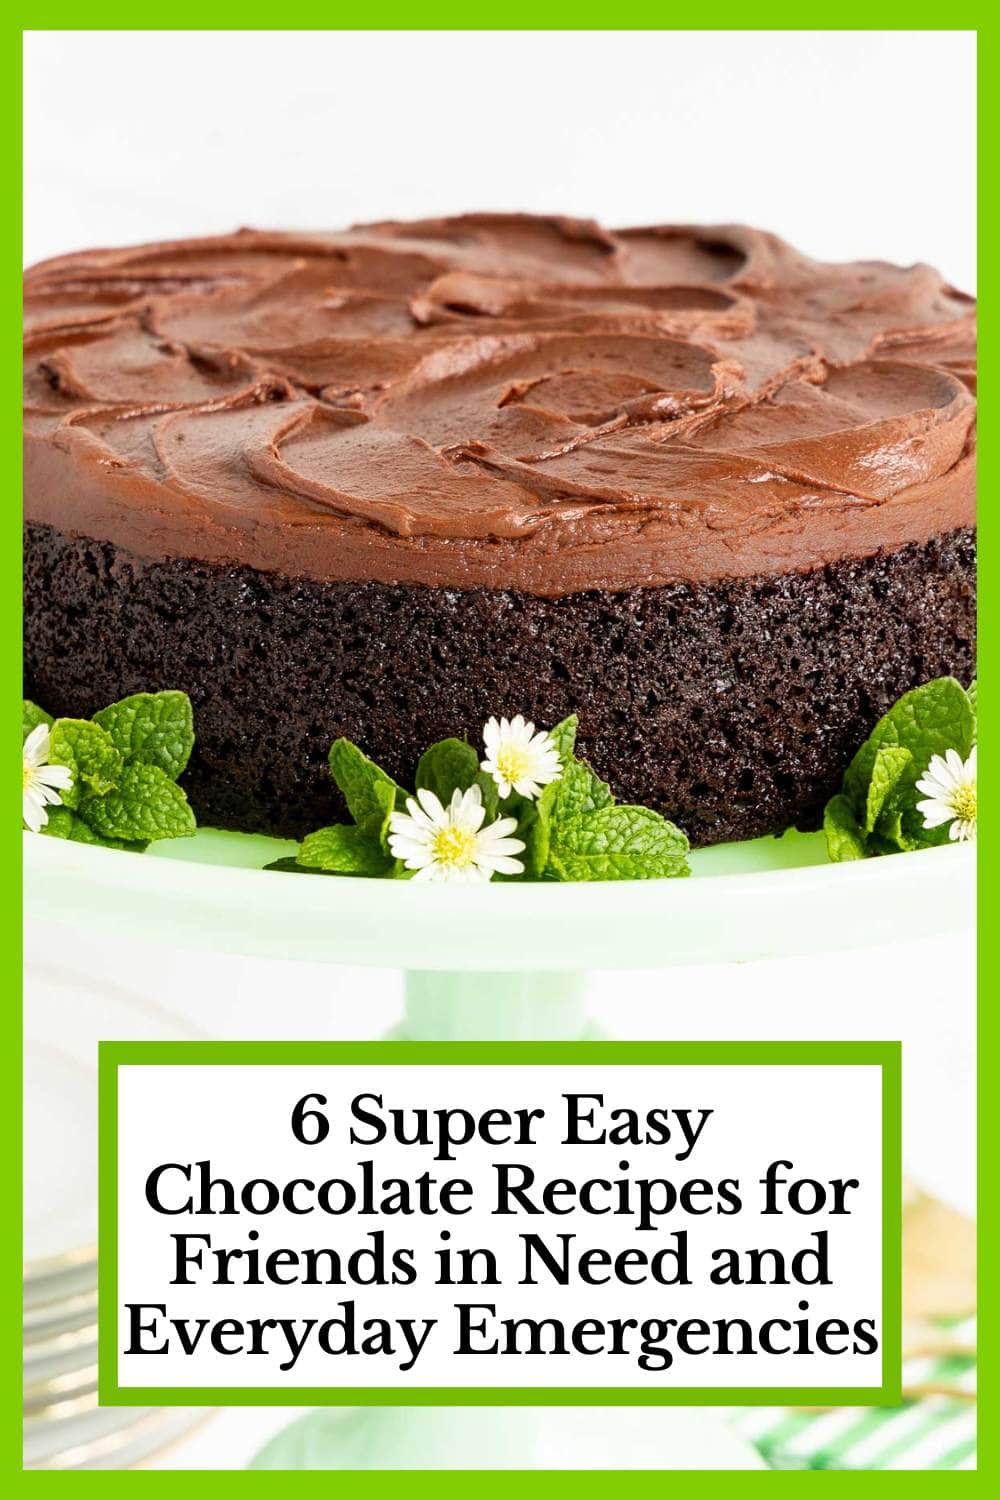 6 Super Easy Chocolate Recipes for Friends in Need and Everyday Emergencies